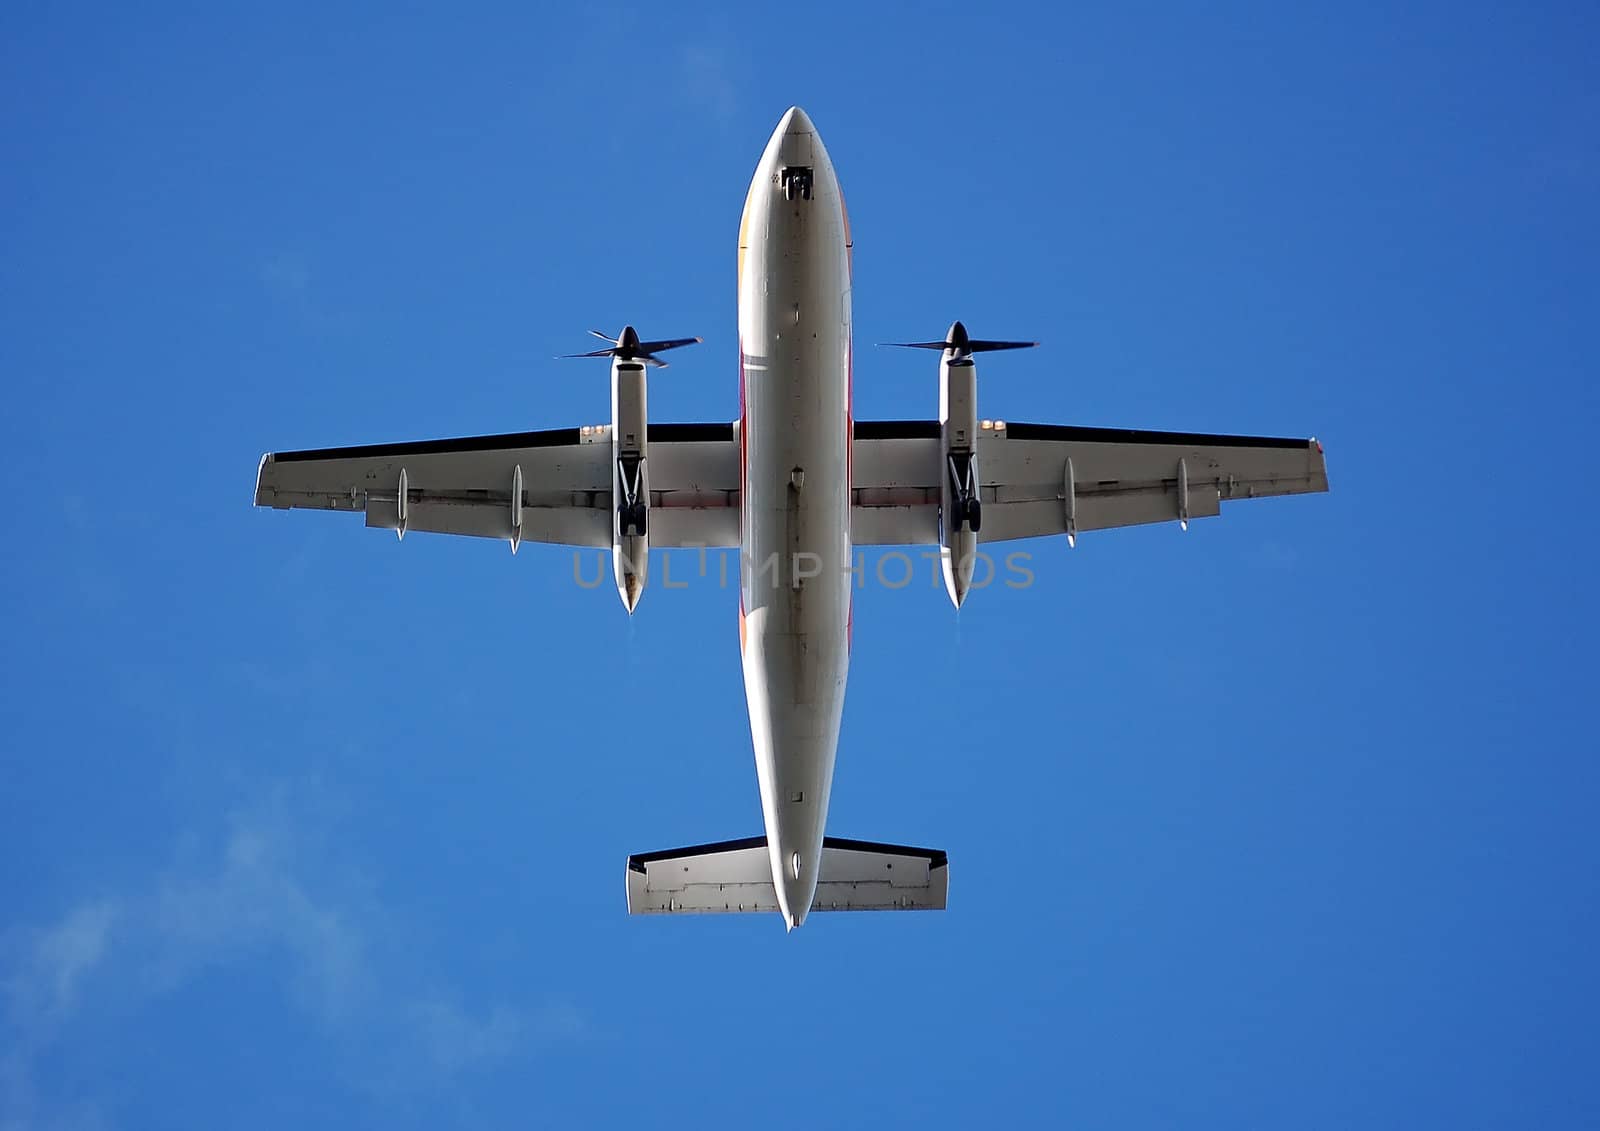 Aircraft flying directly above with a blue sky as a background